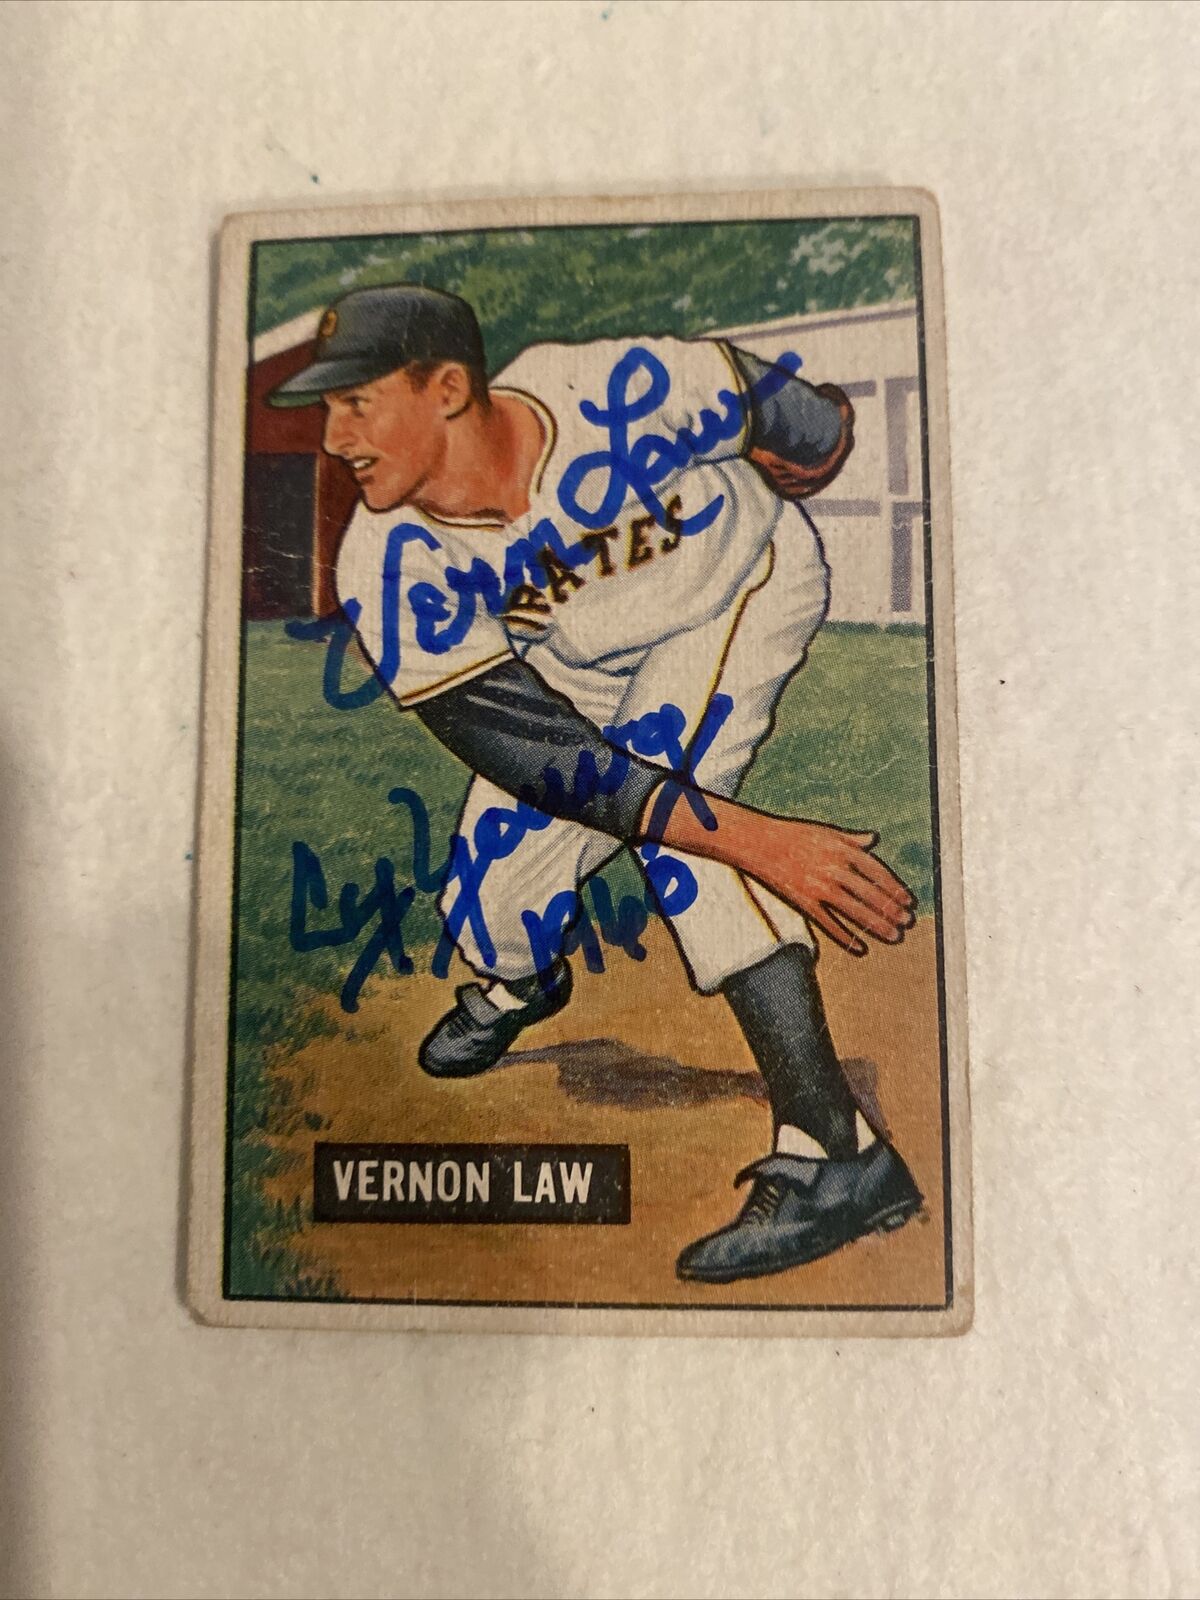 Vernon Law Autographed 1951 Bowman Card #203 Pirates CY Young 1960